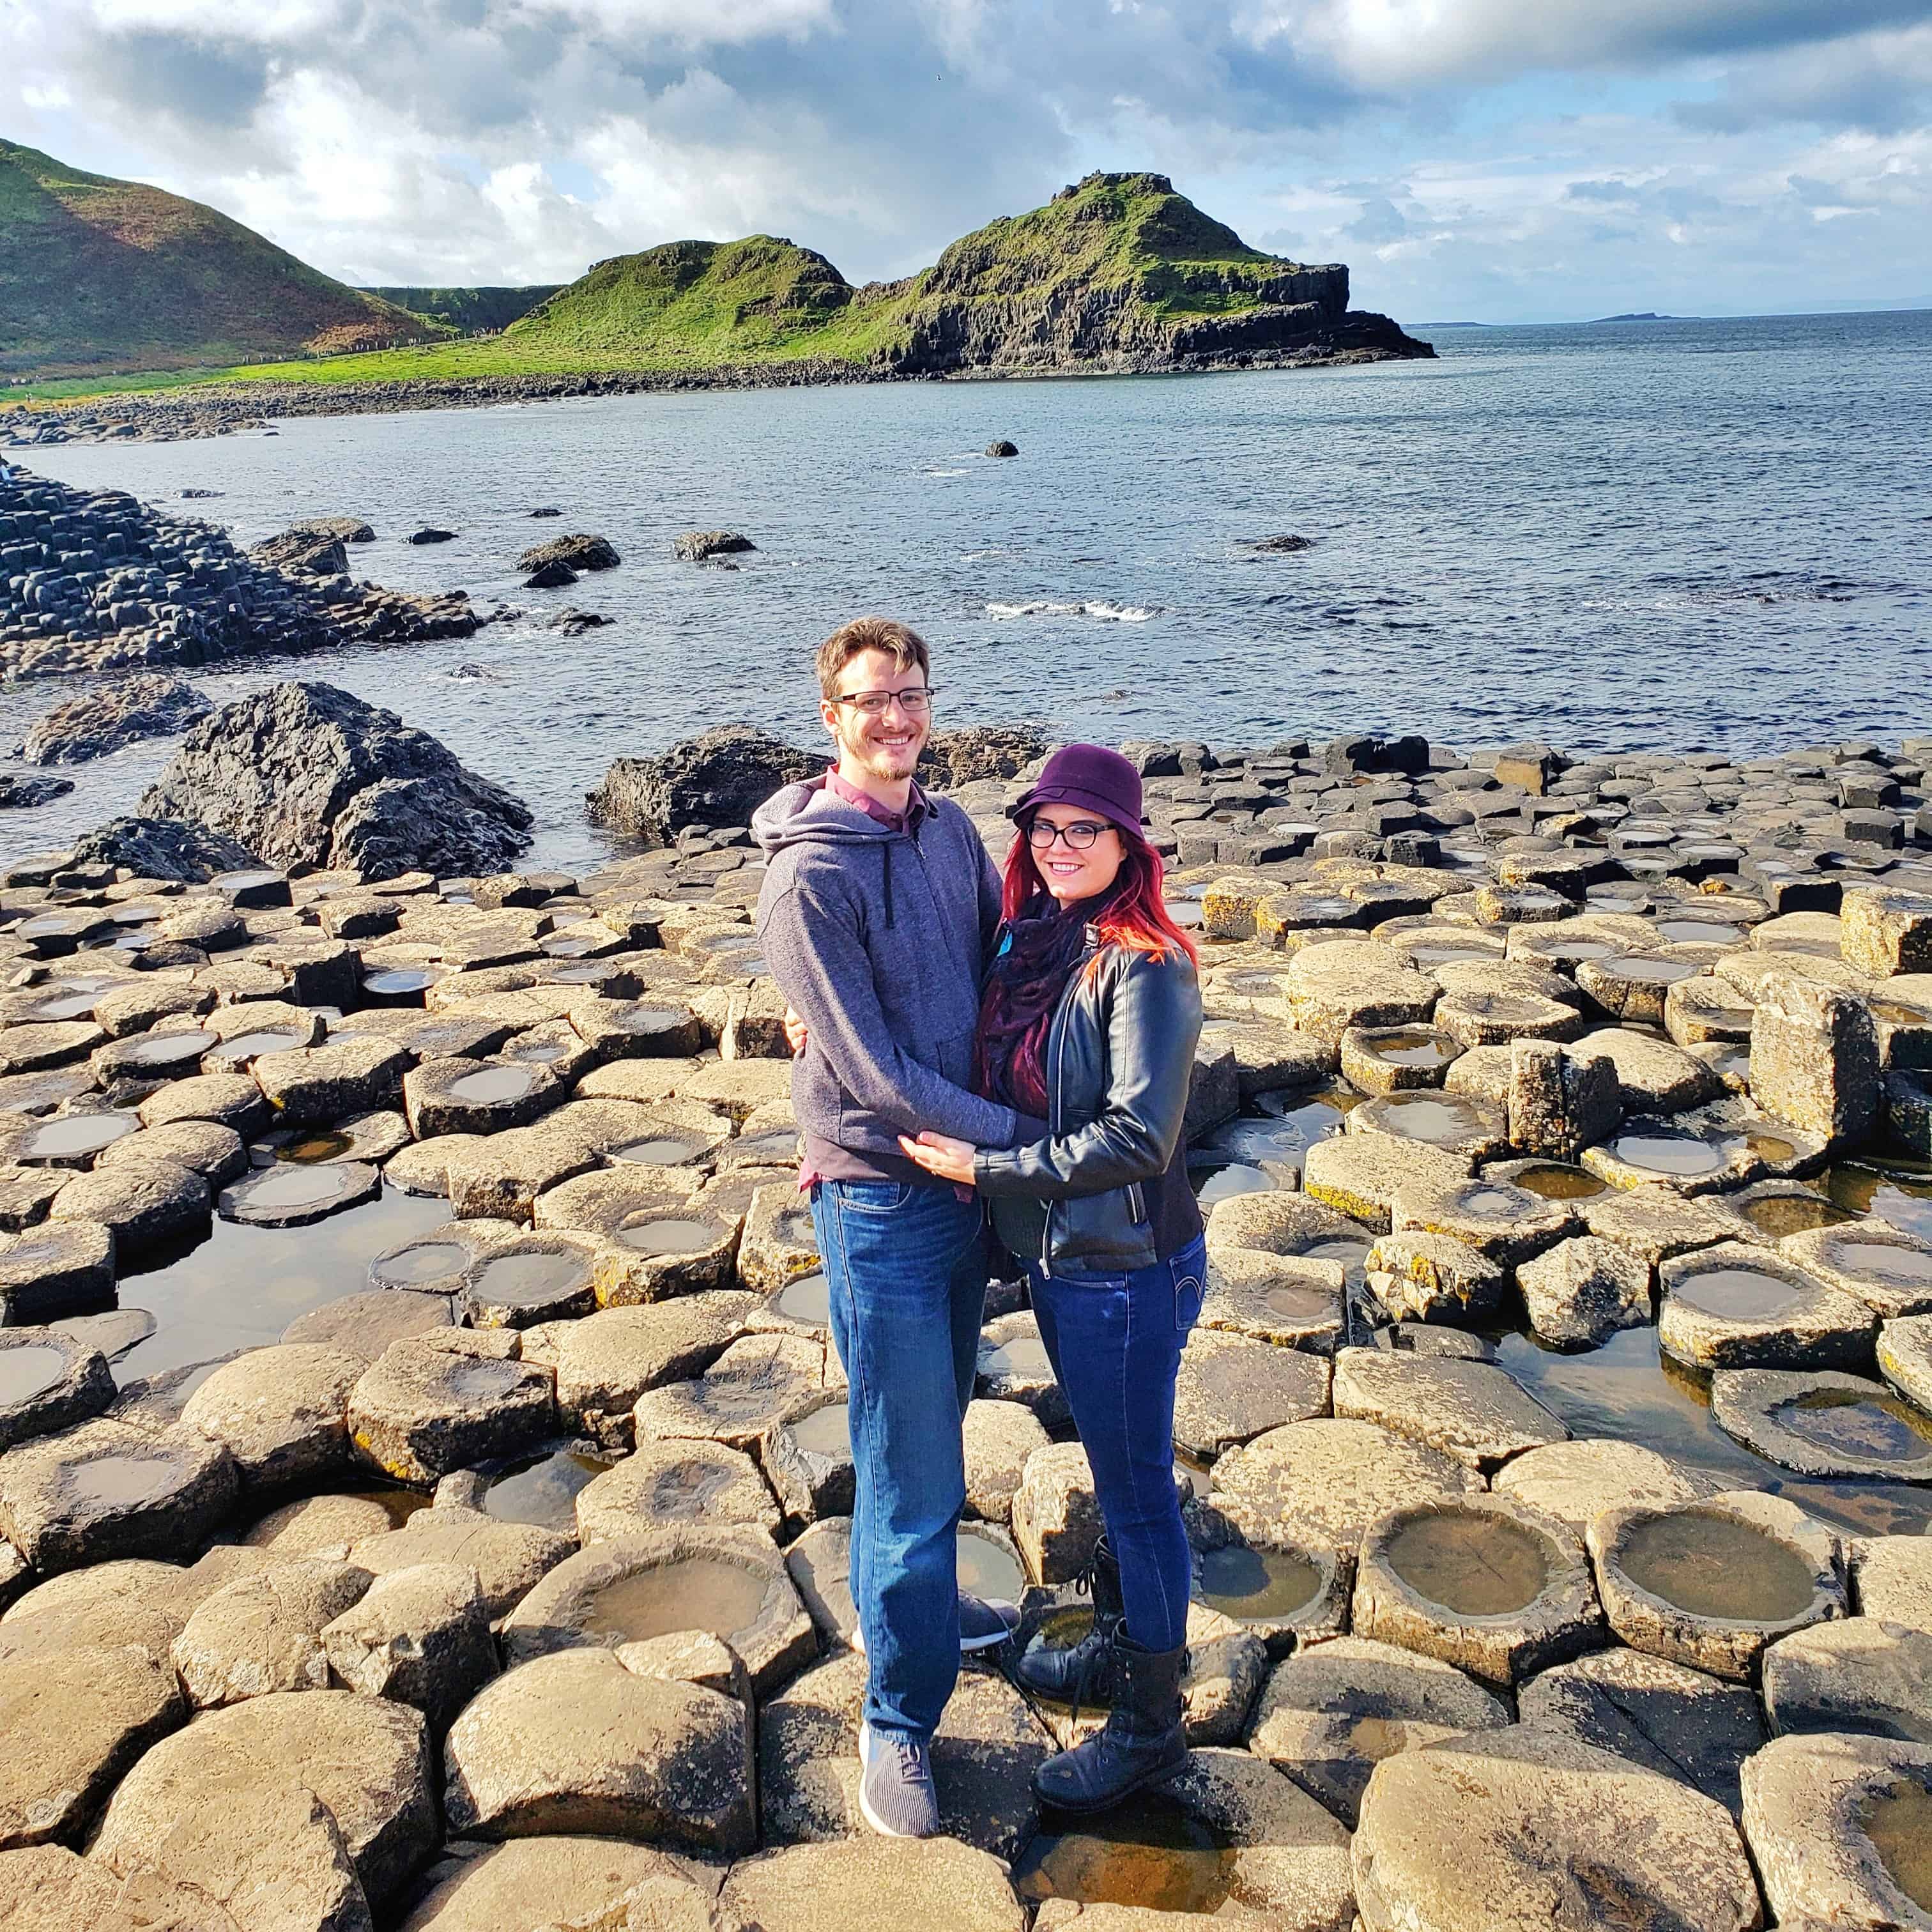 A couple (Mikey and Sckylar) stand on circular rocks next to the ocean.